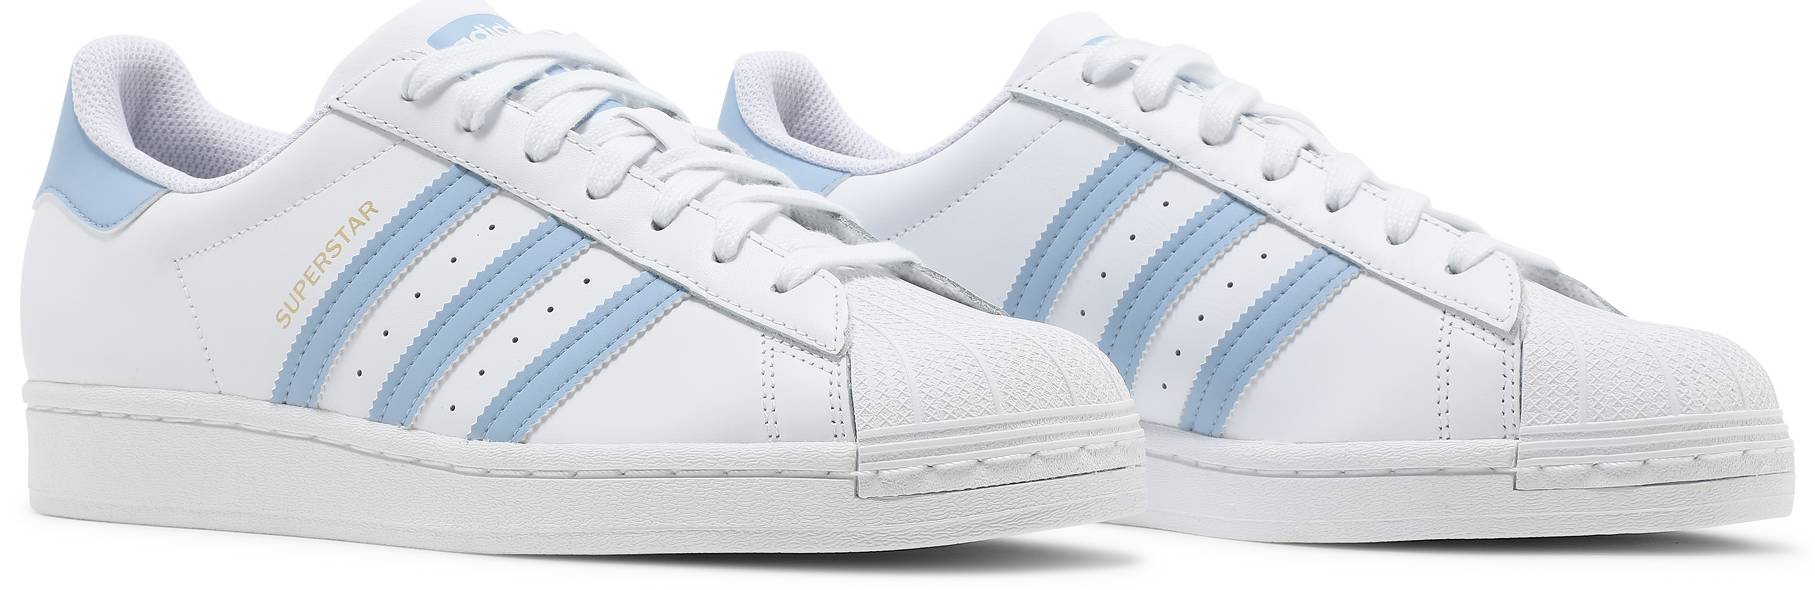 Superstar 'White Ambient Sky' - adidas - H05645 | GOAT